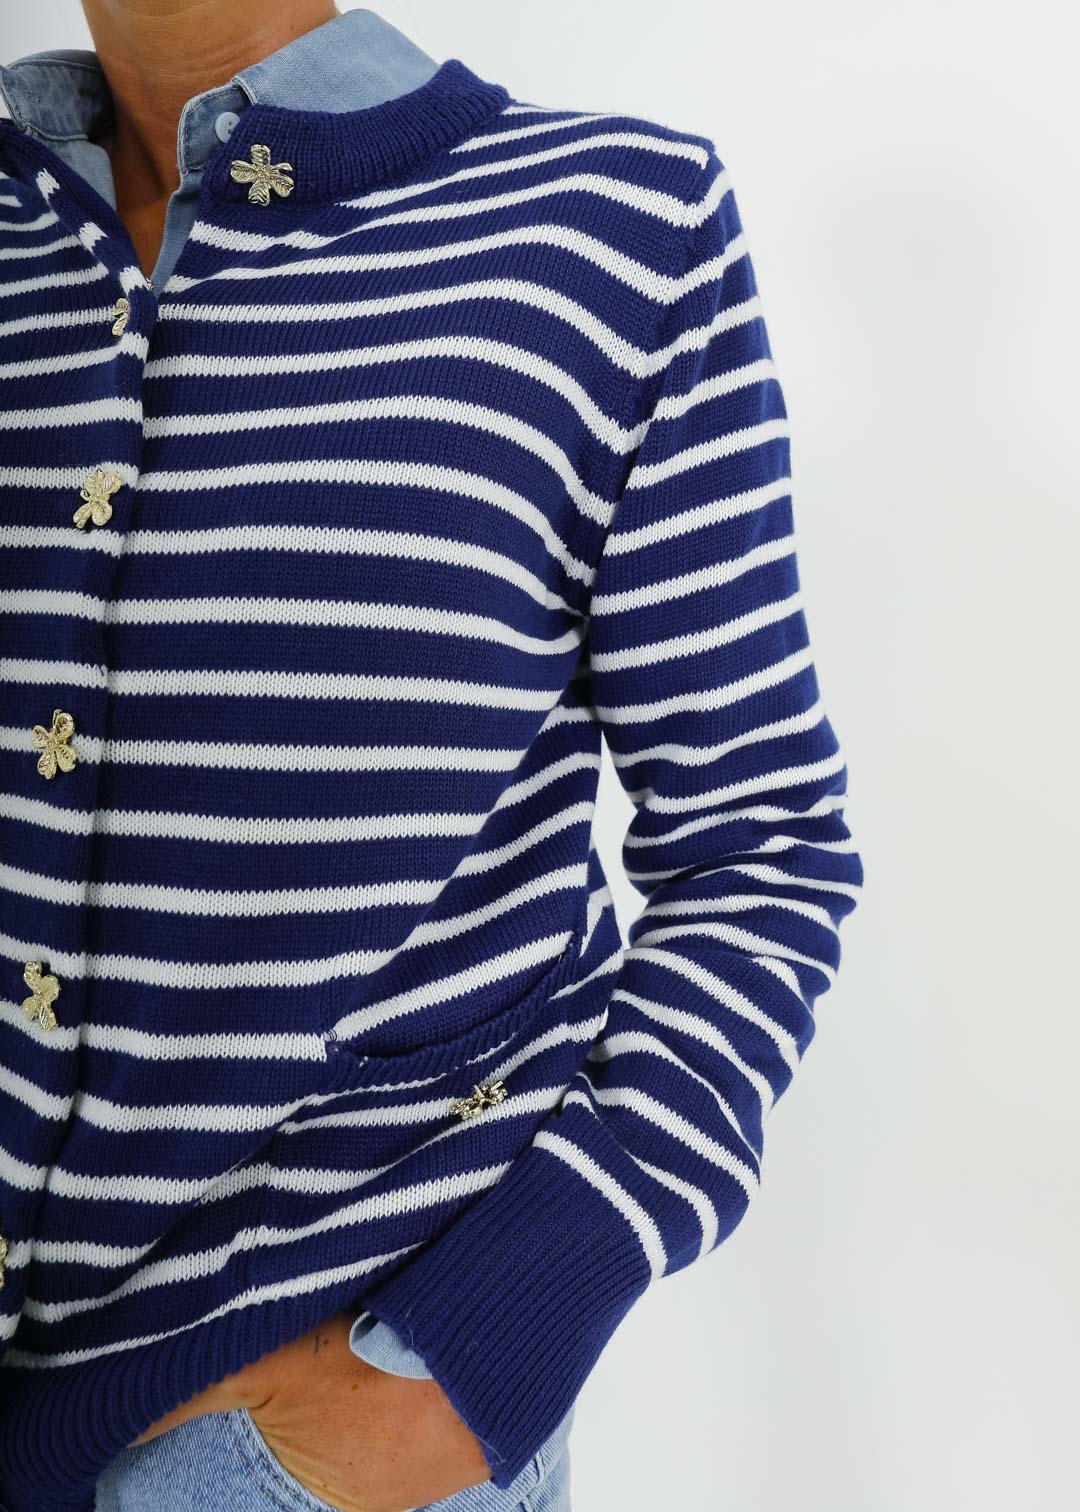 NAVY AND WHITE GOLDEN BUTTONS JACKET